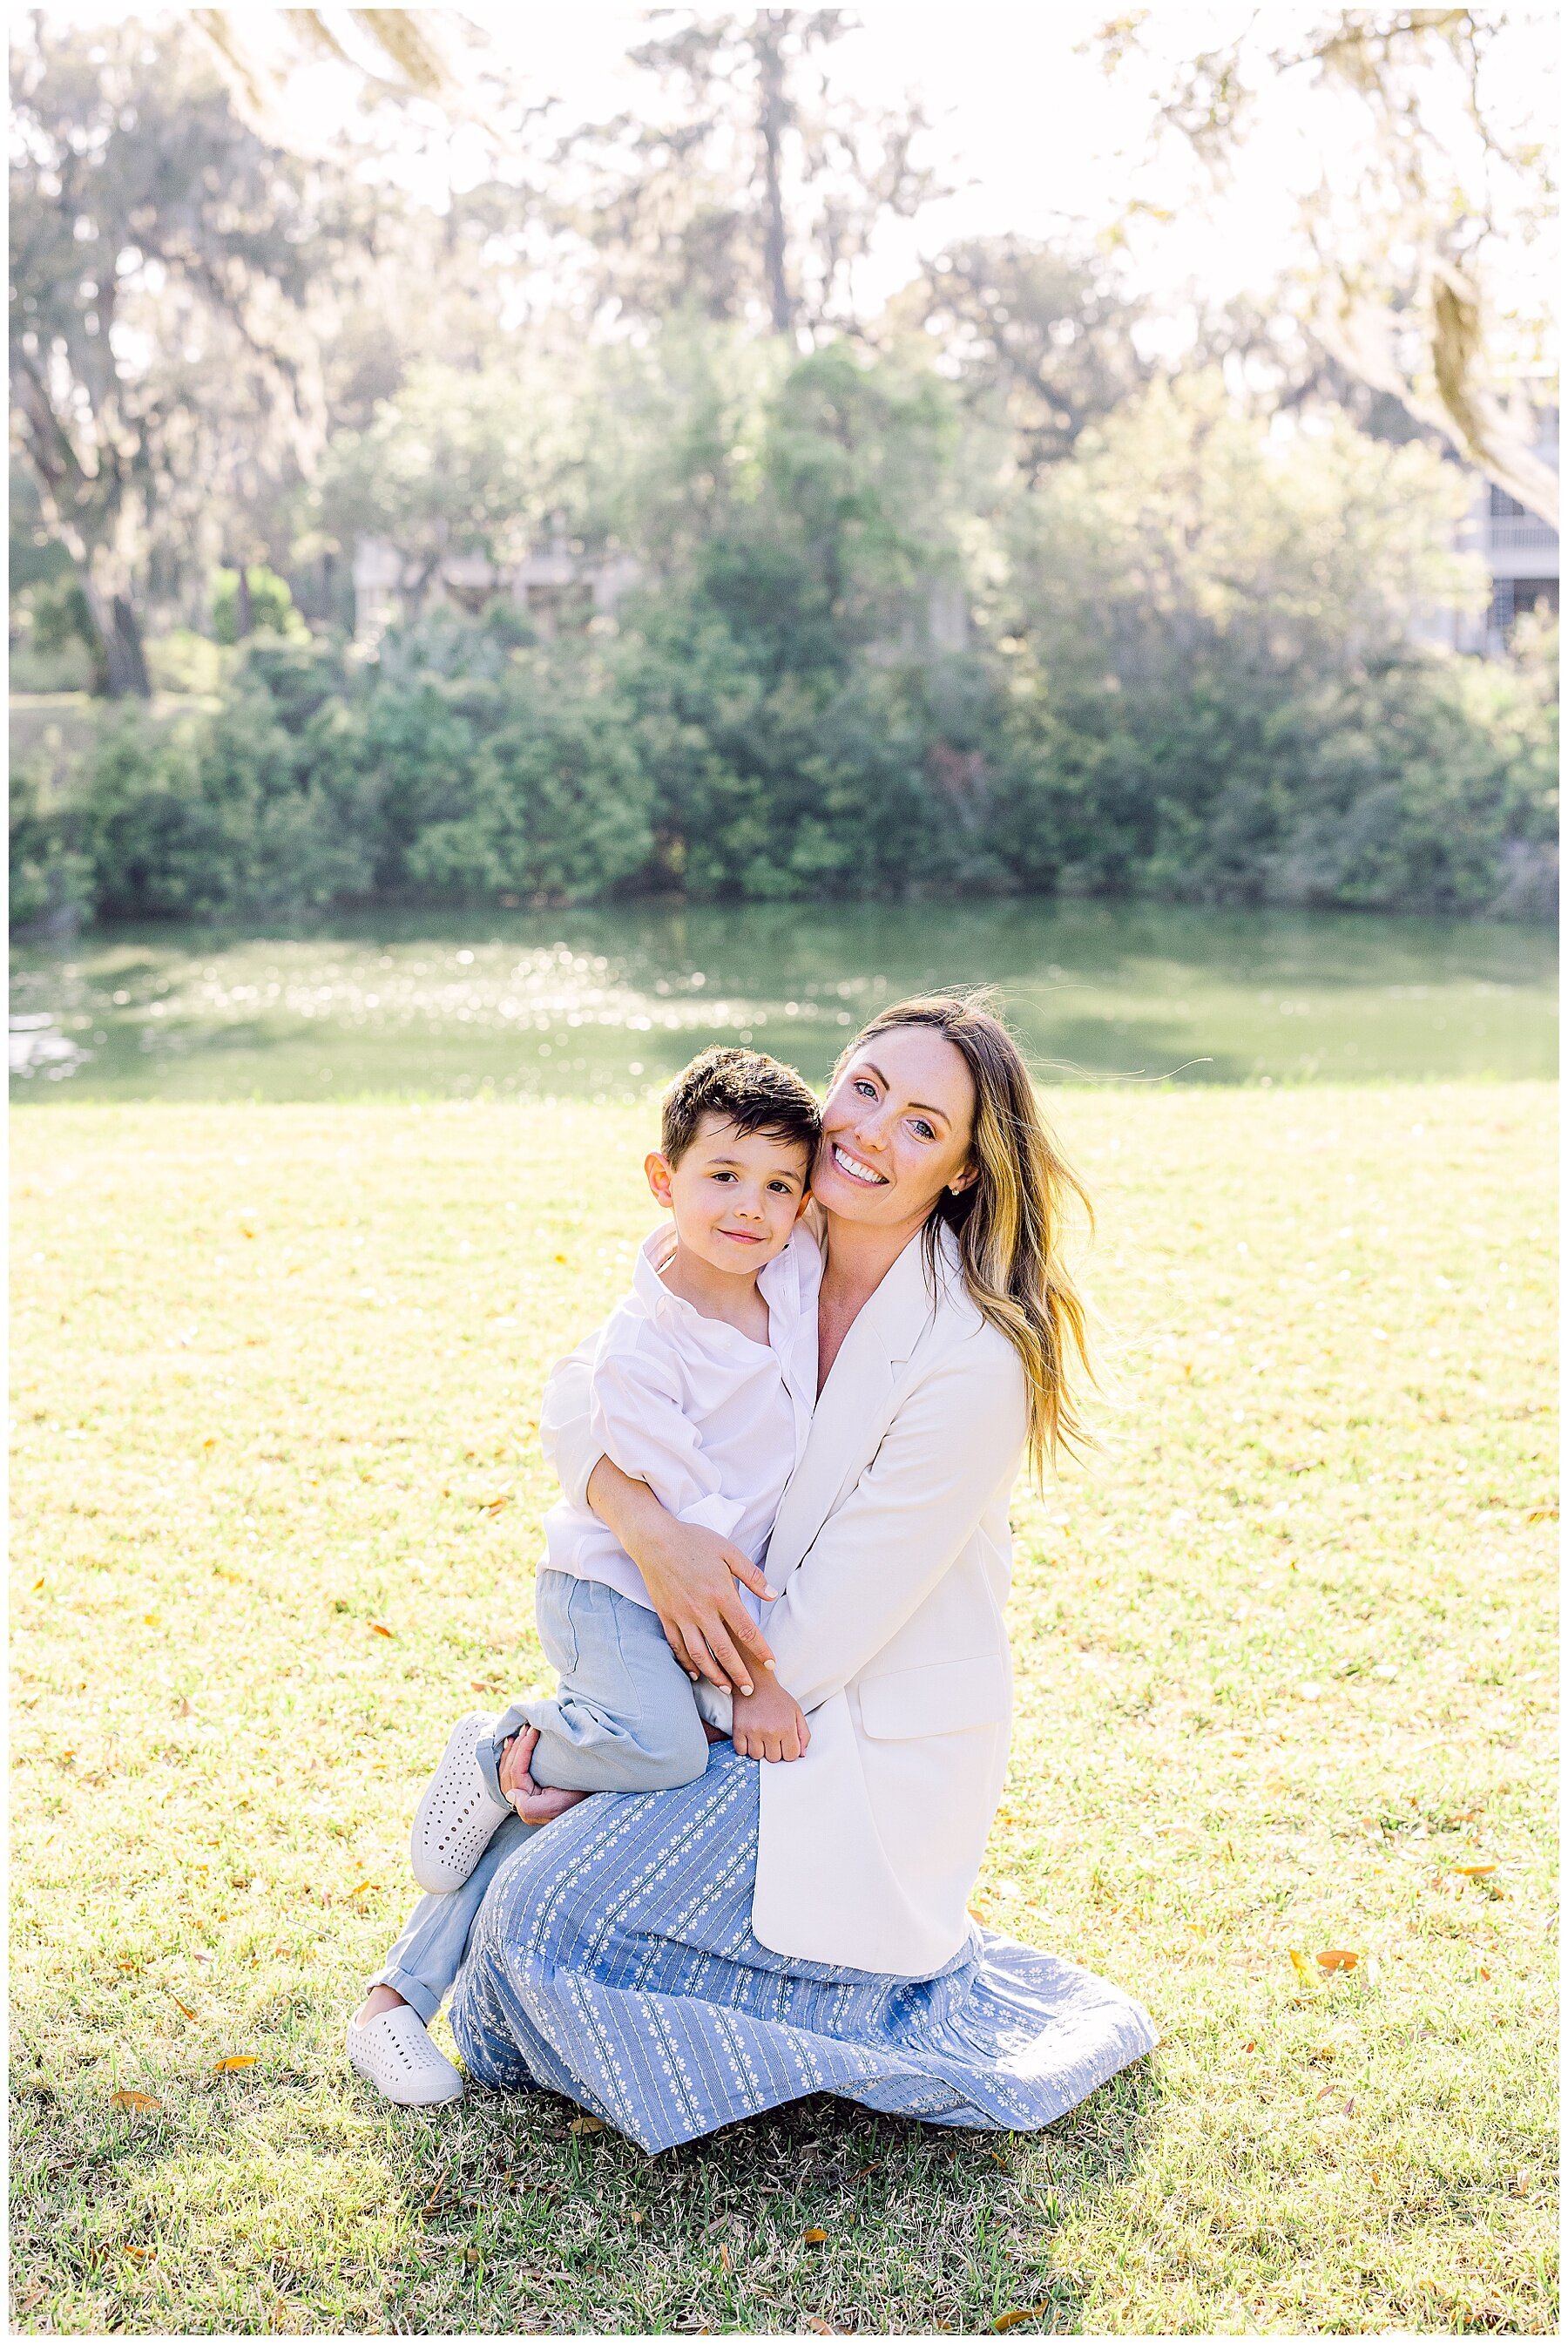 Katherine_Ives_Photography_Sallah_Palmetto_Bluff_Family_Session_34.JPG